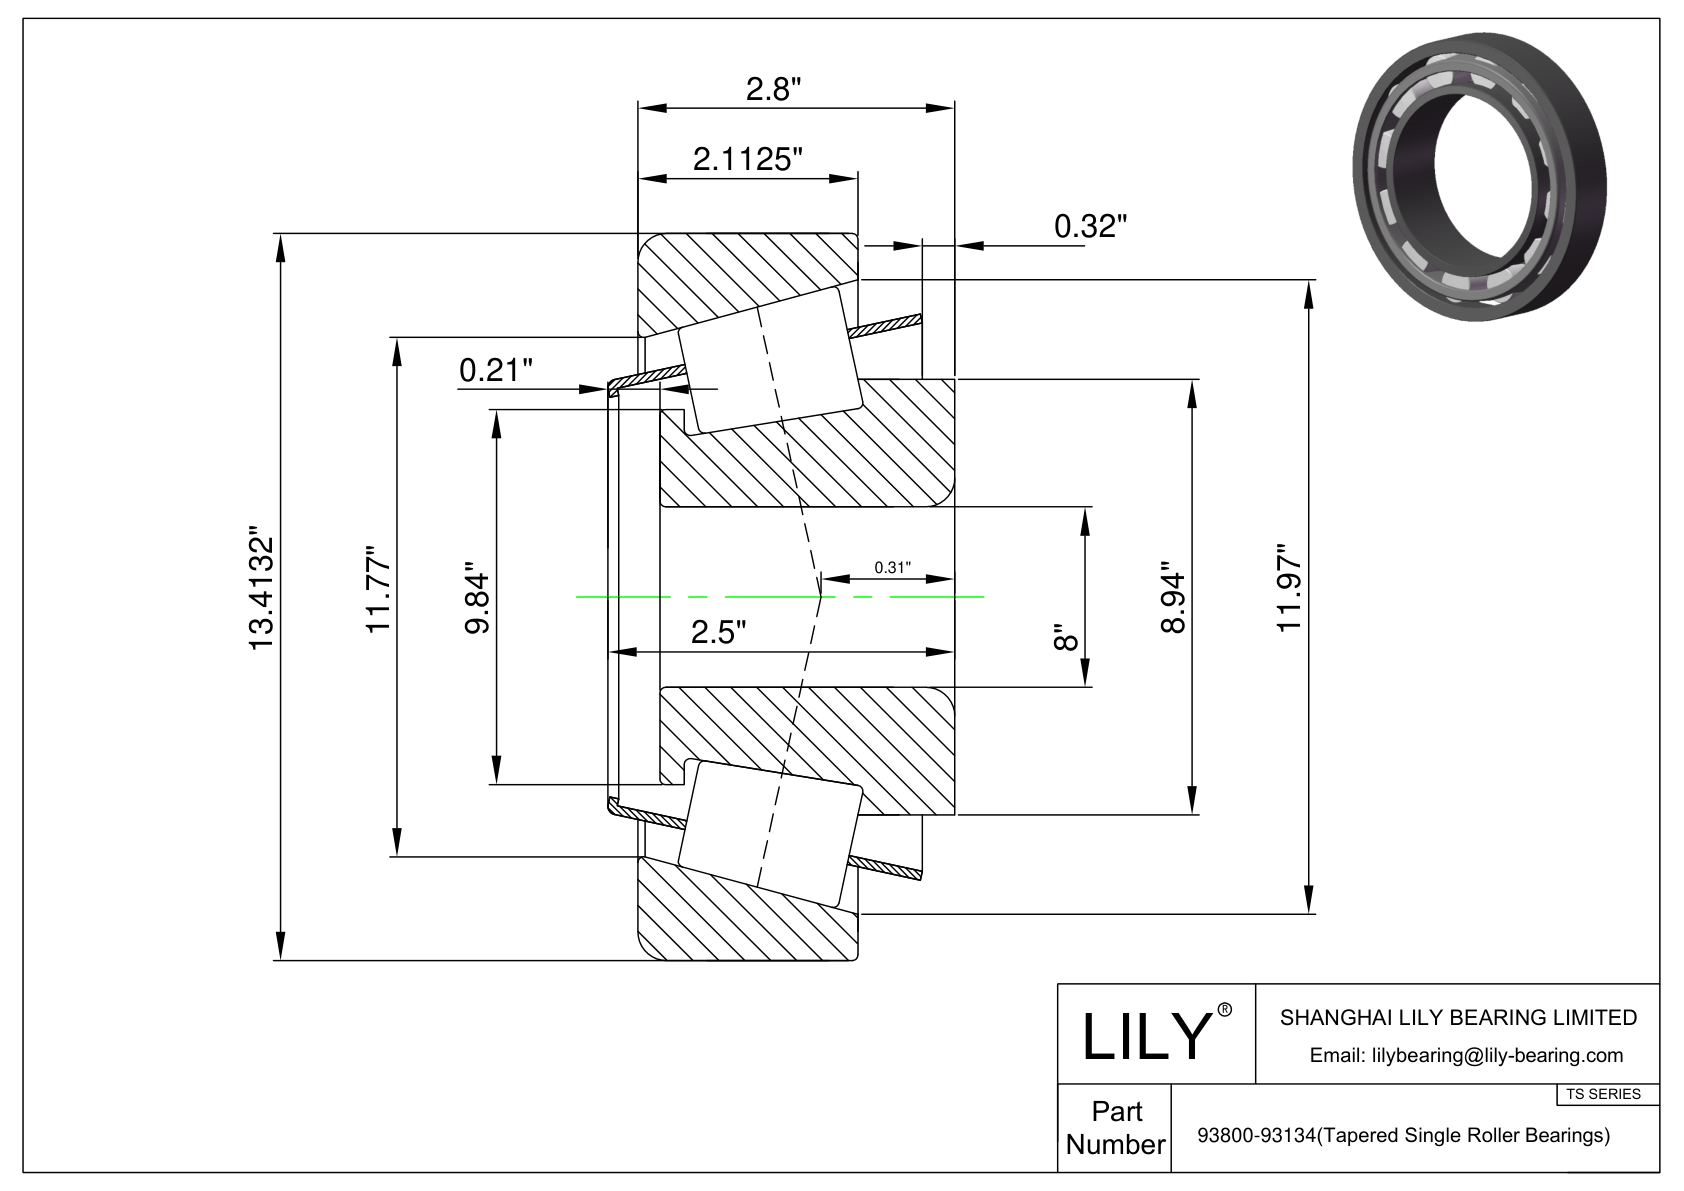 93800-93134 TS (Tapered Single Roller Bearings) (Imperial) cad drawing